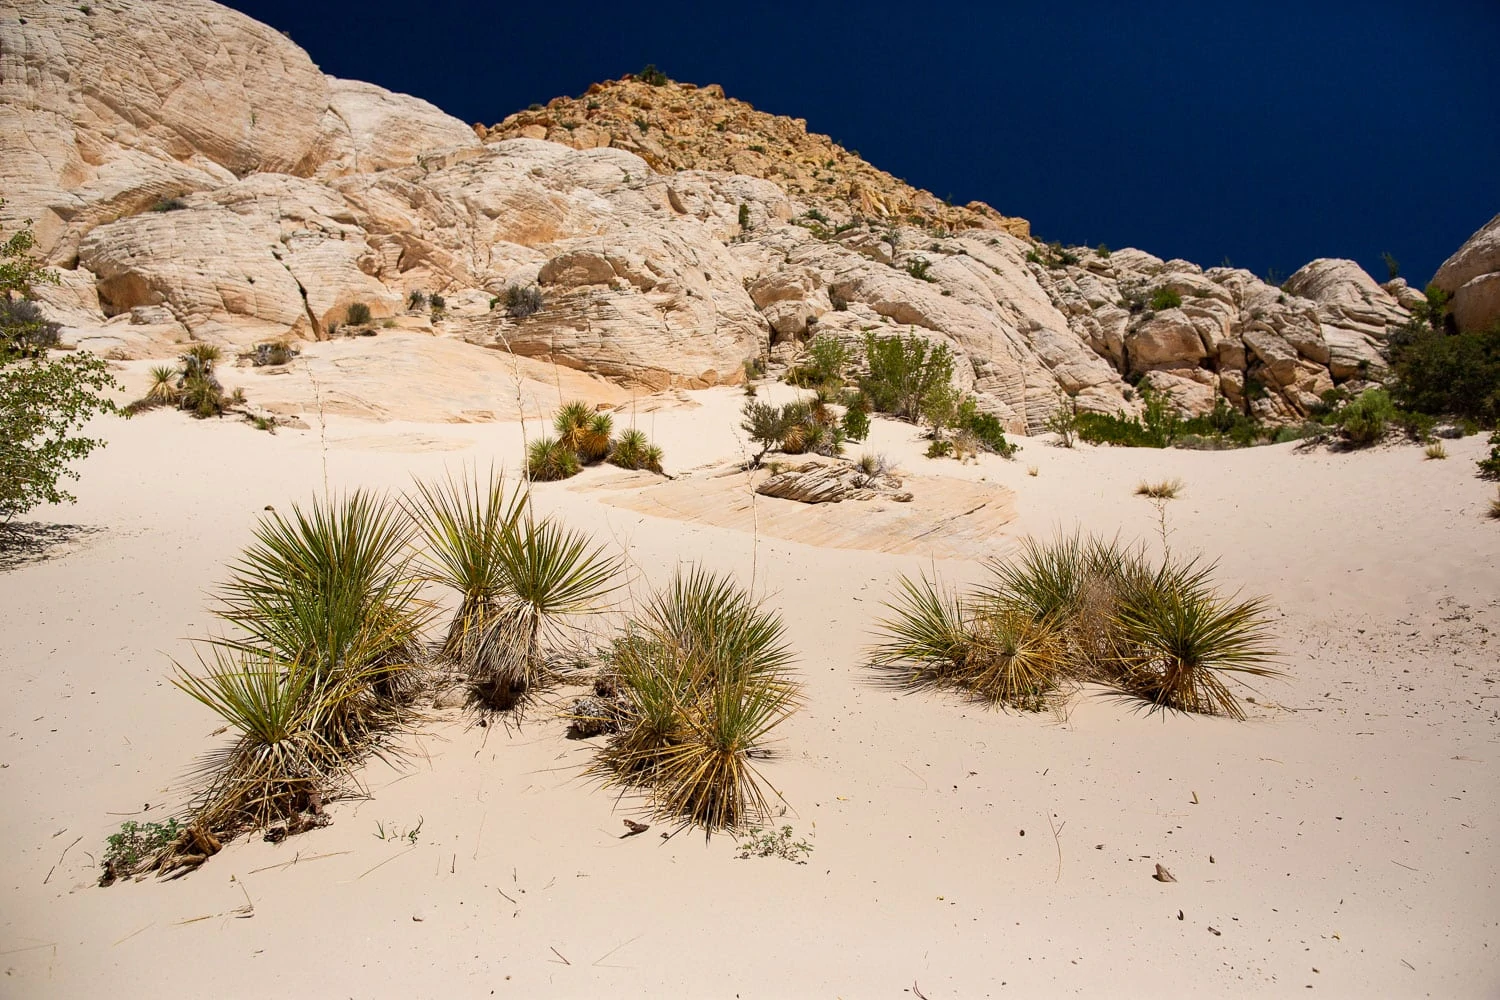 The yucca plants and white sand inside of the white stone mountain at Snow Canyon State Park.